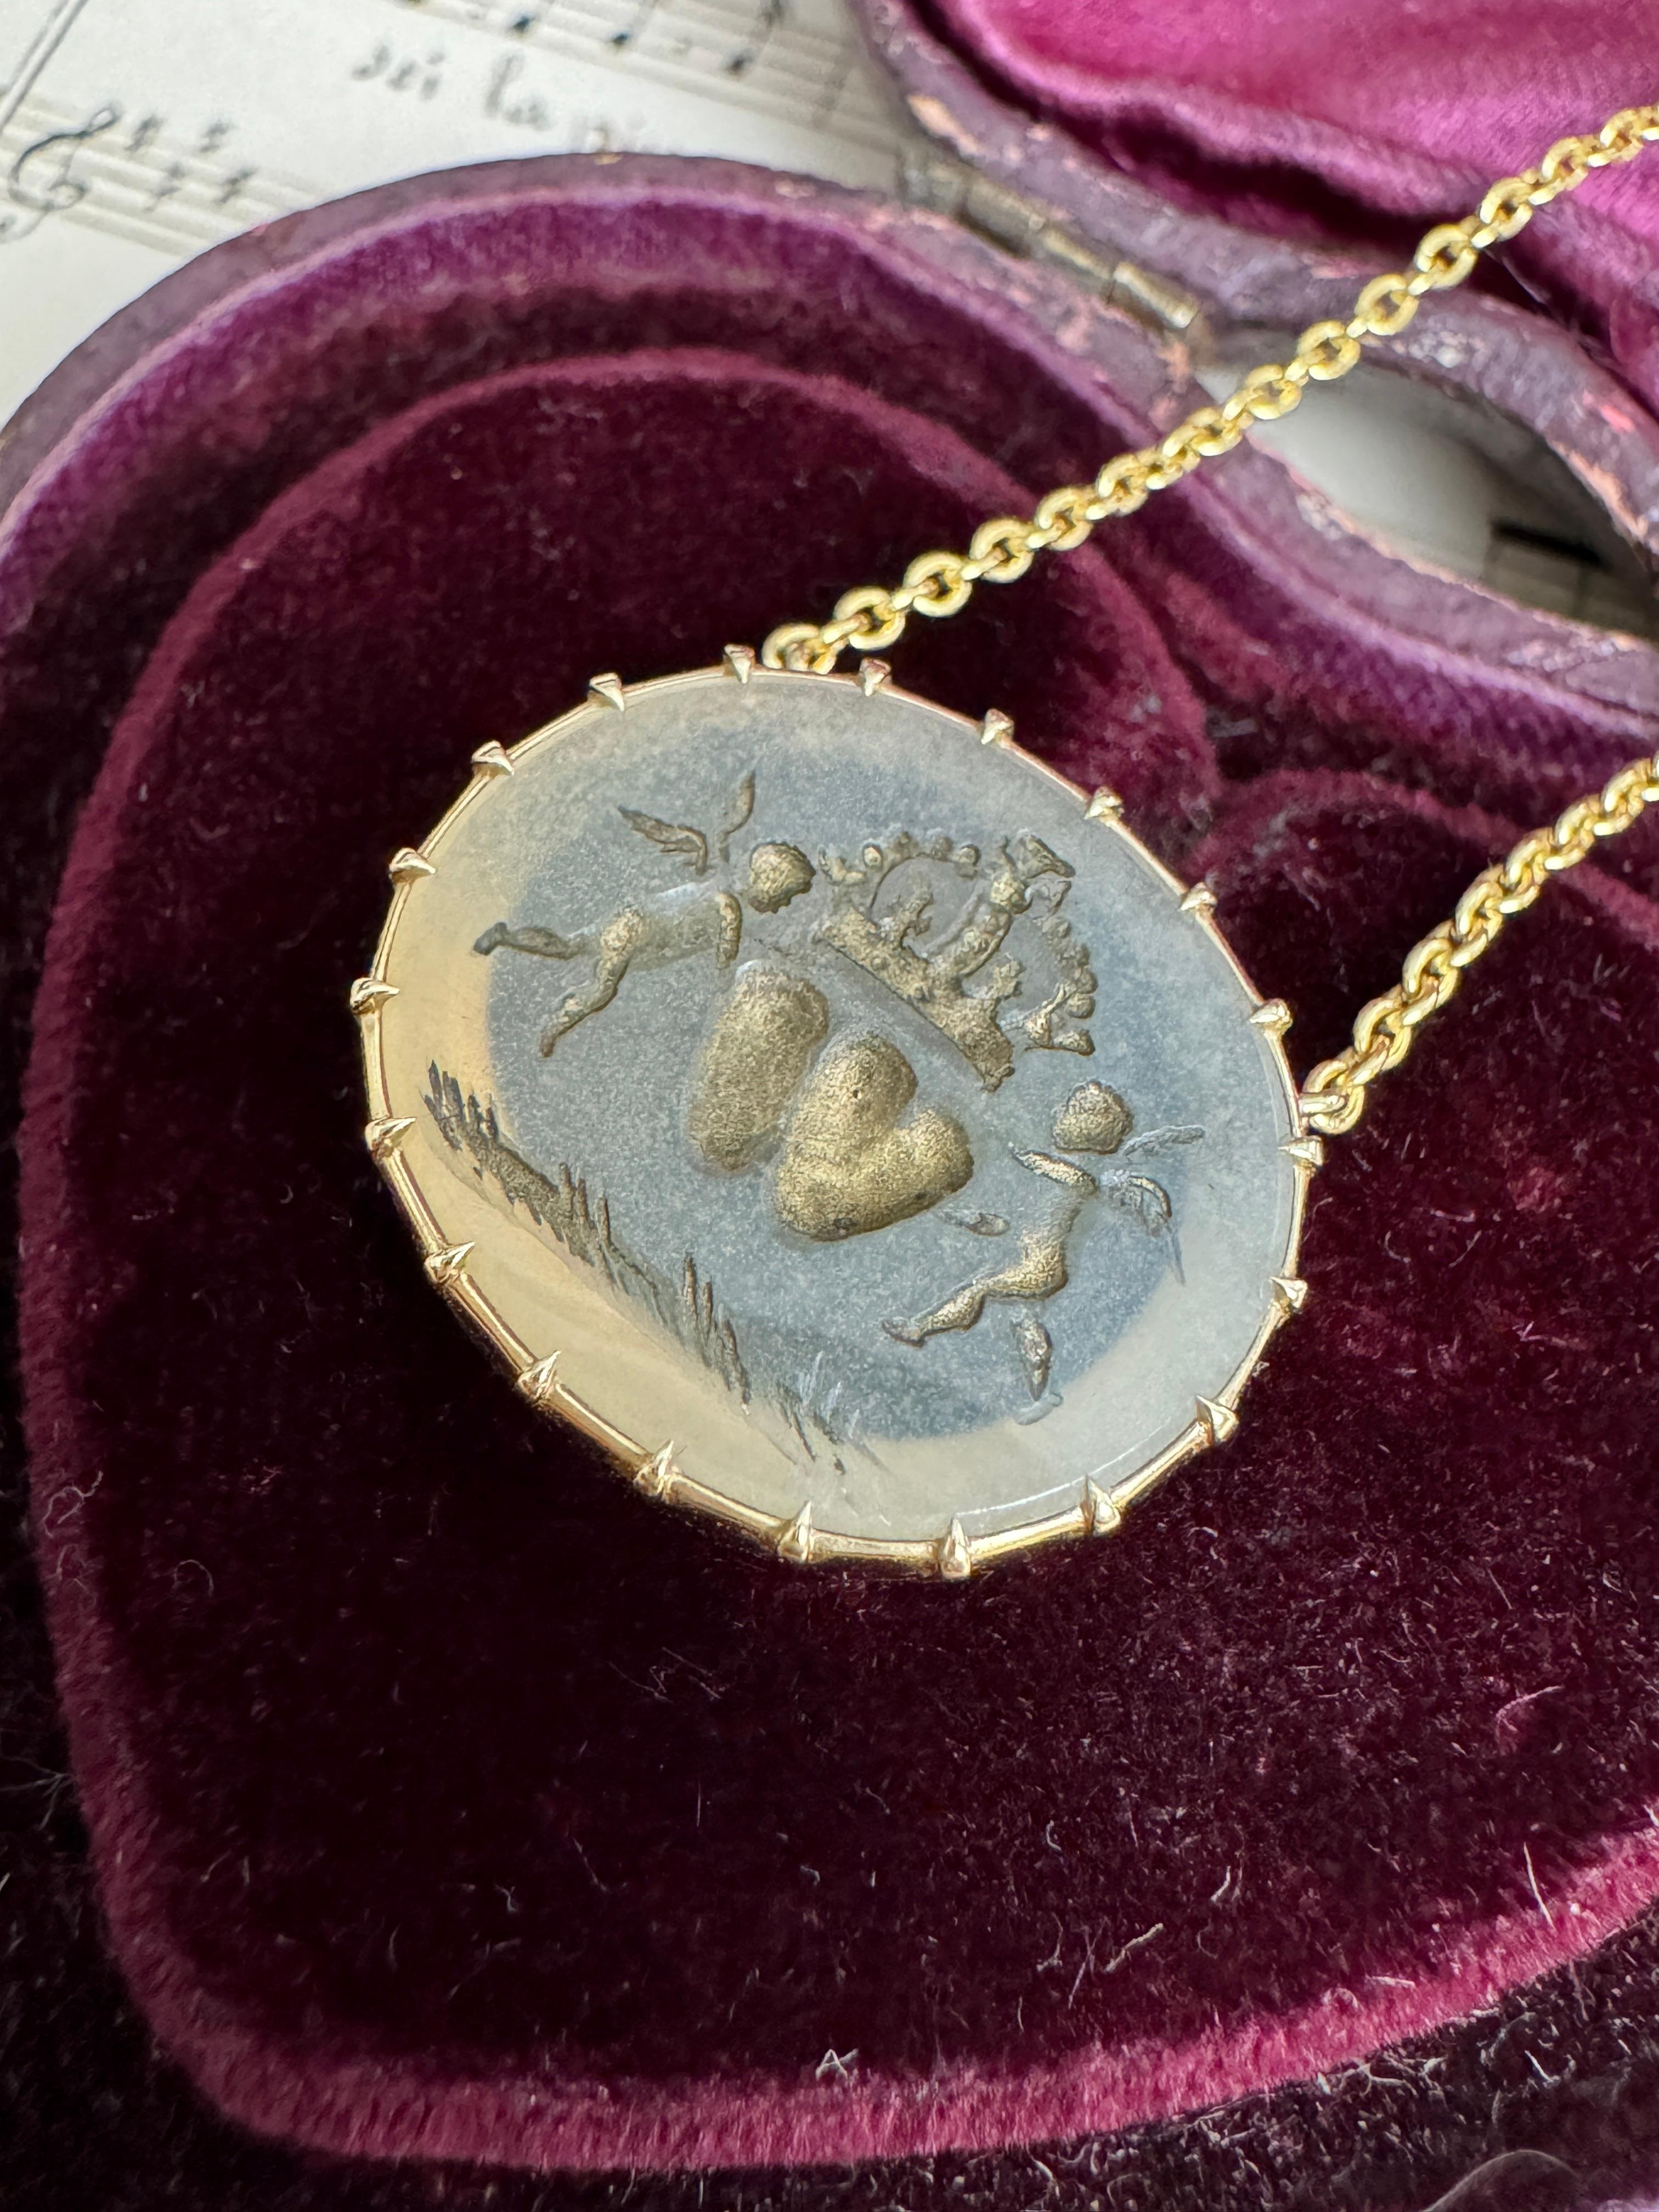 This romantic and pristine early 19th century chalcedony intaglio has been hand-carved in painstaking detail depicting two hearts nestled side-by-side, expressing everlasting love and marriage, as the two hearts are together as one. The hearts are